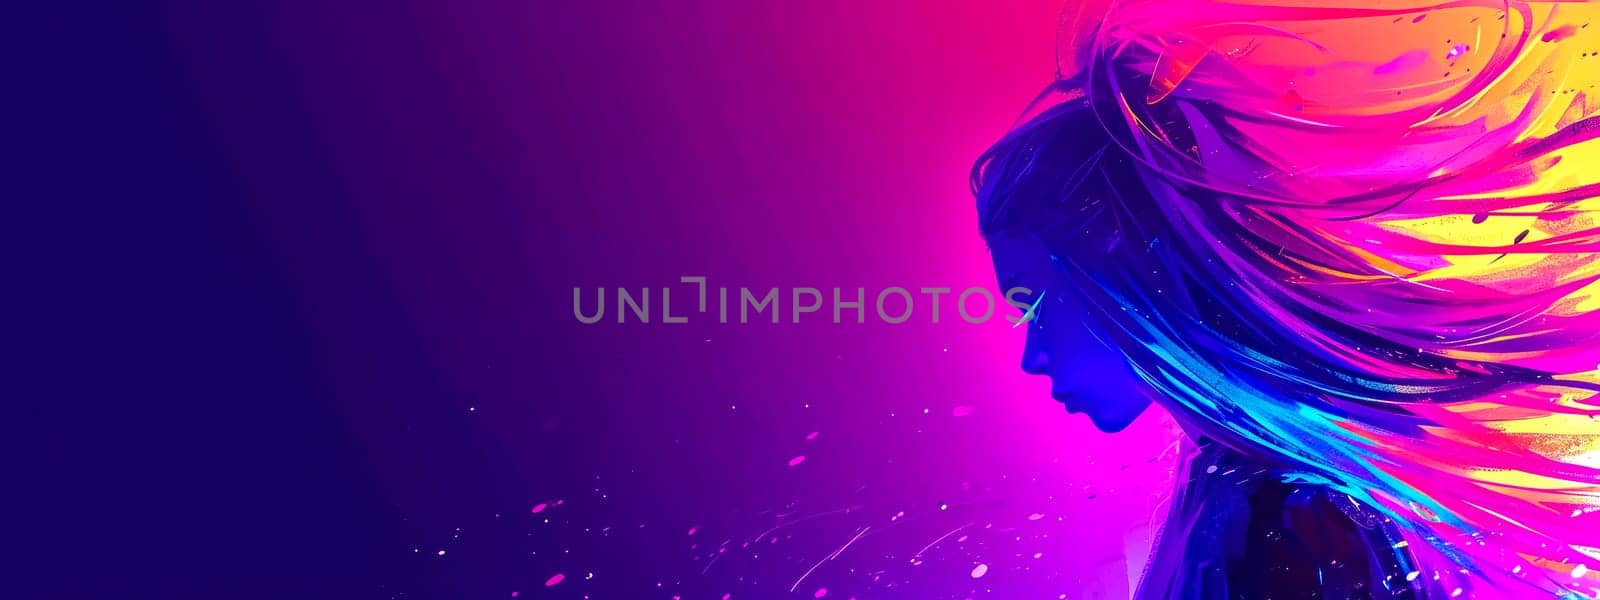 profile of a woman with vibrant, flowing hair in a vivid array of pink, blue, and yellow hues against a deep purple background, exuding a sense of creativity and digital artistry by Edophoto